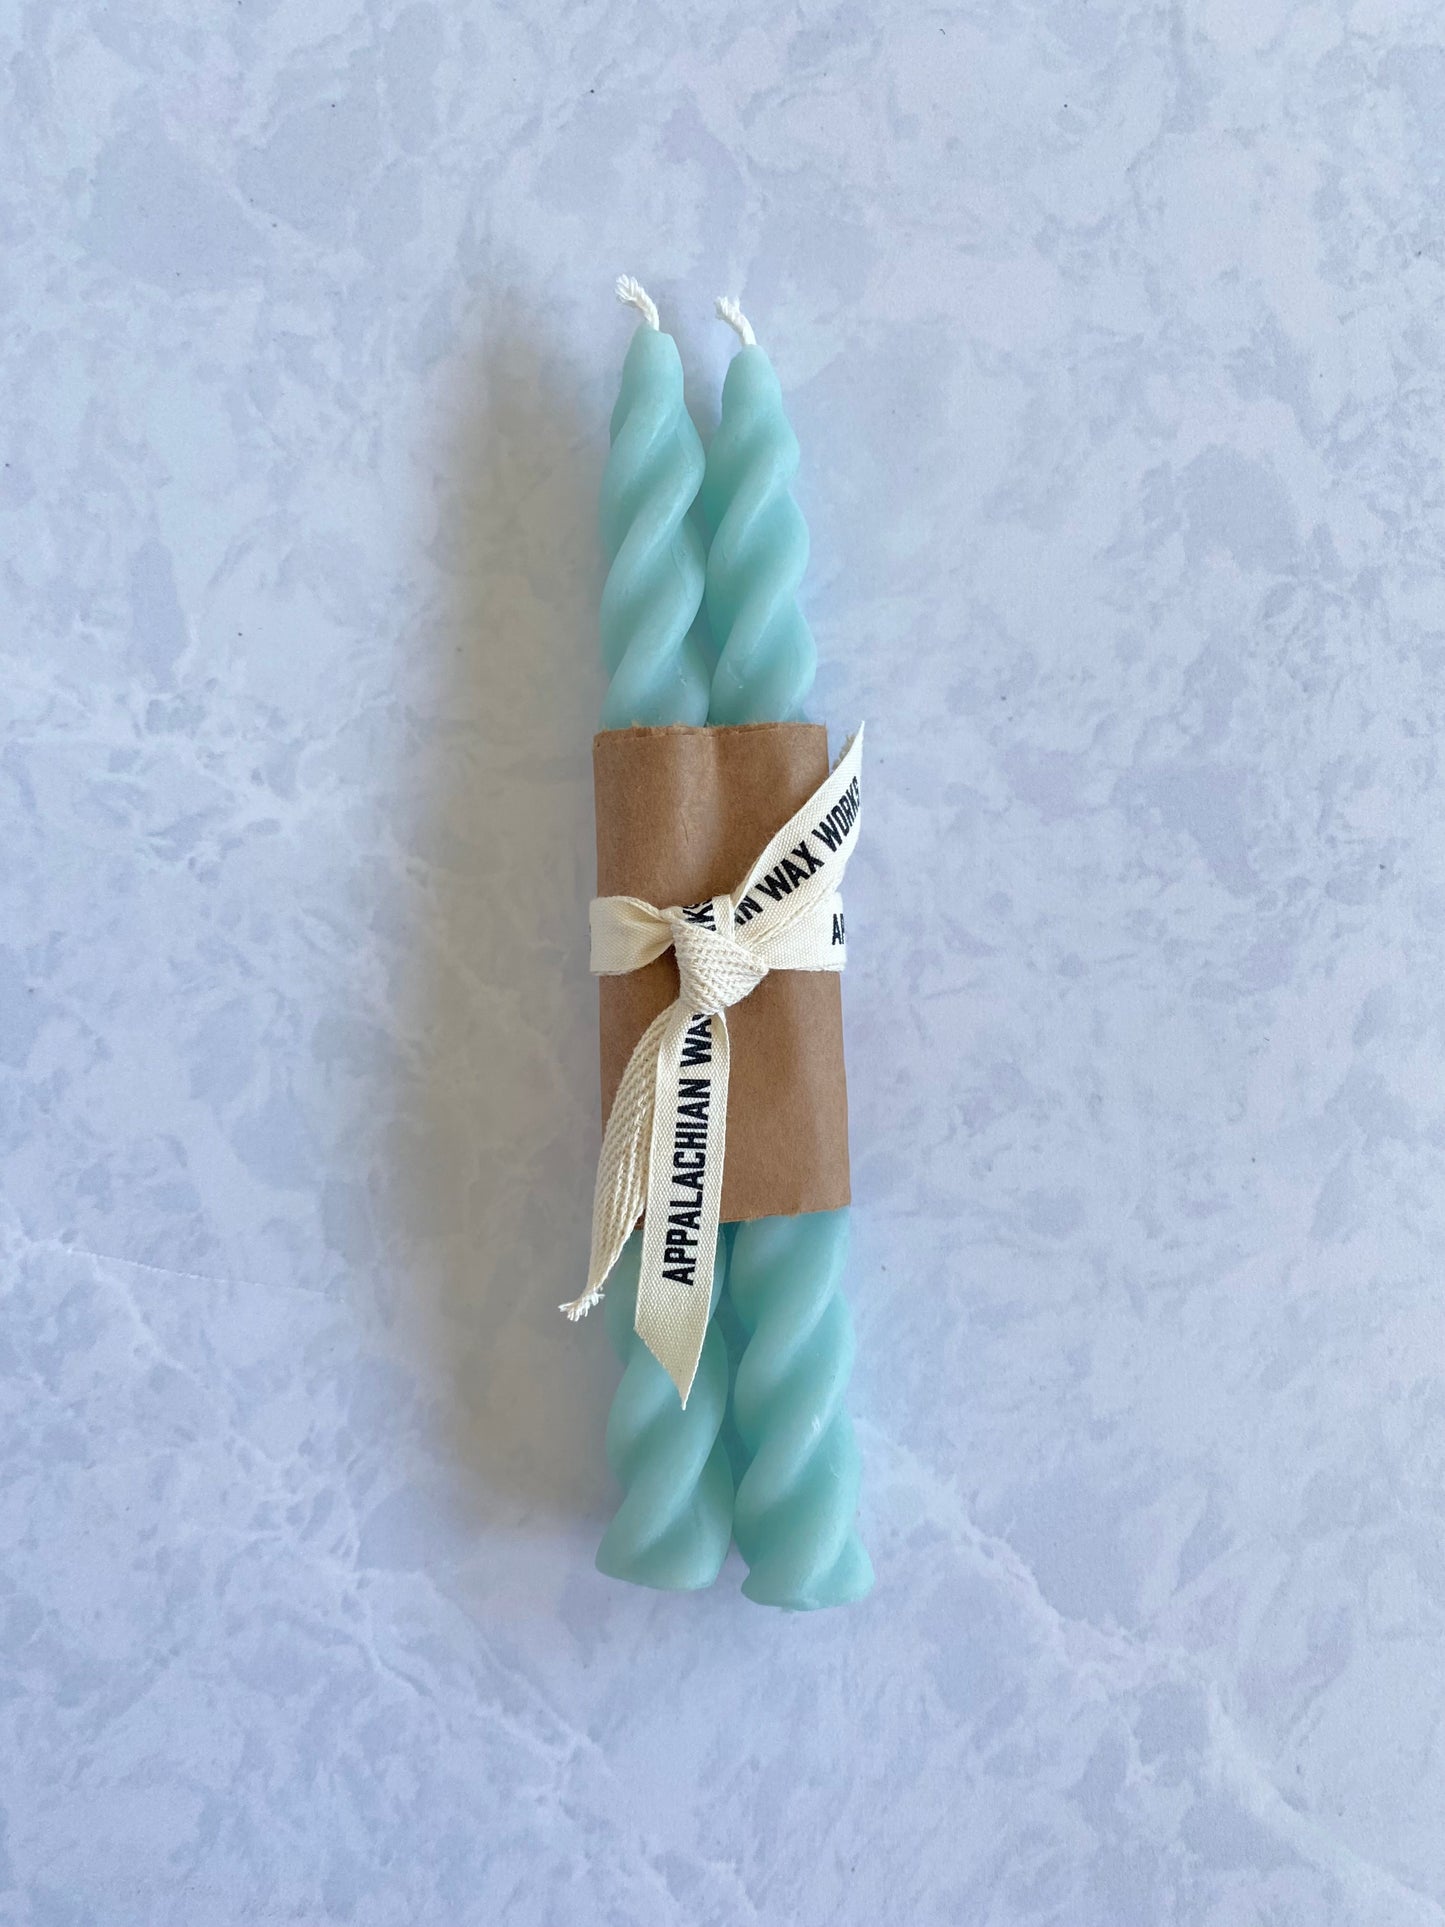 Beeswax Spiral Taper Candles in Robins Egg Blue Color for Sale